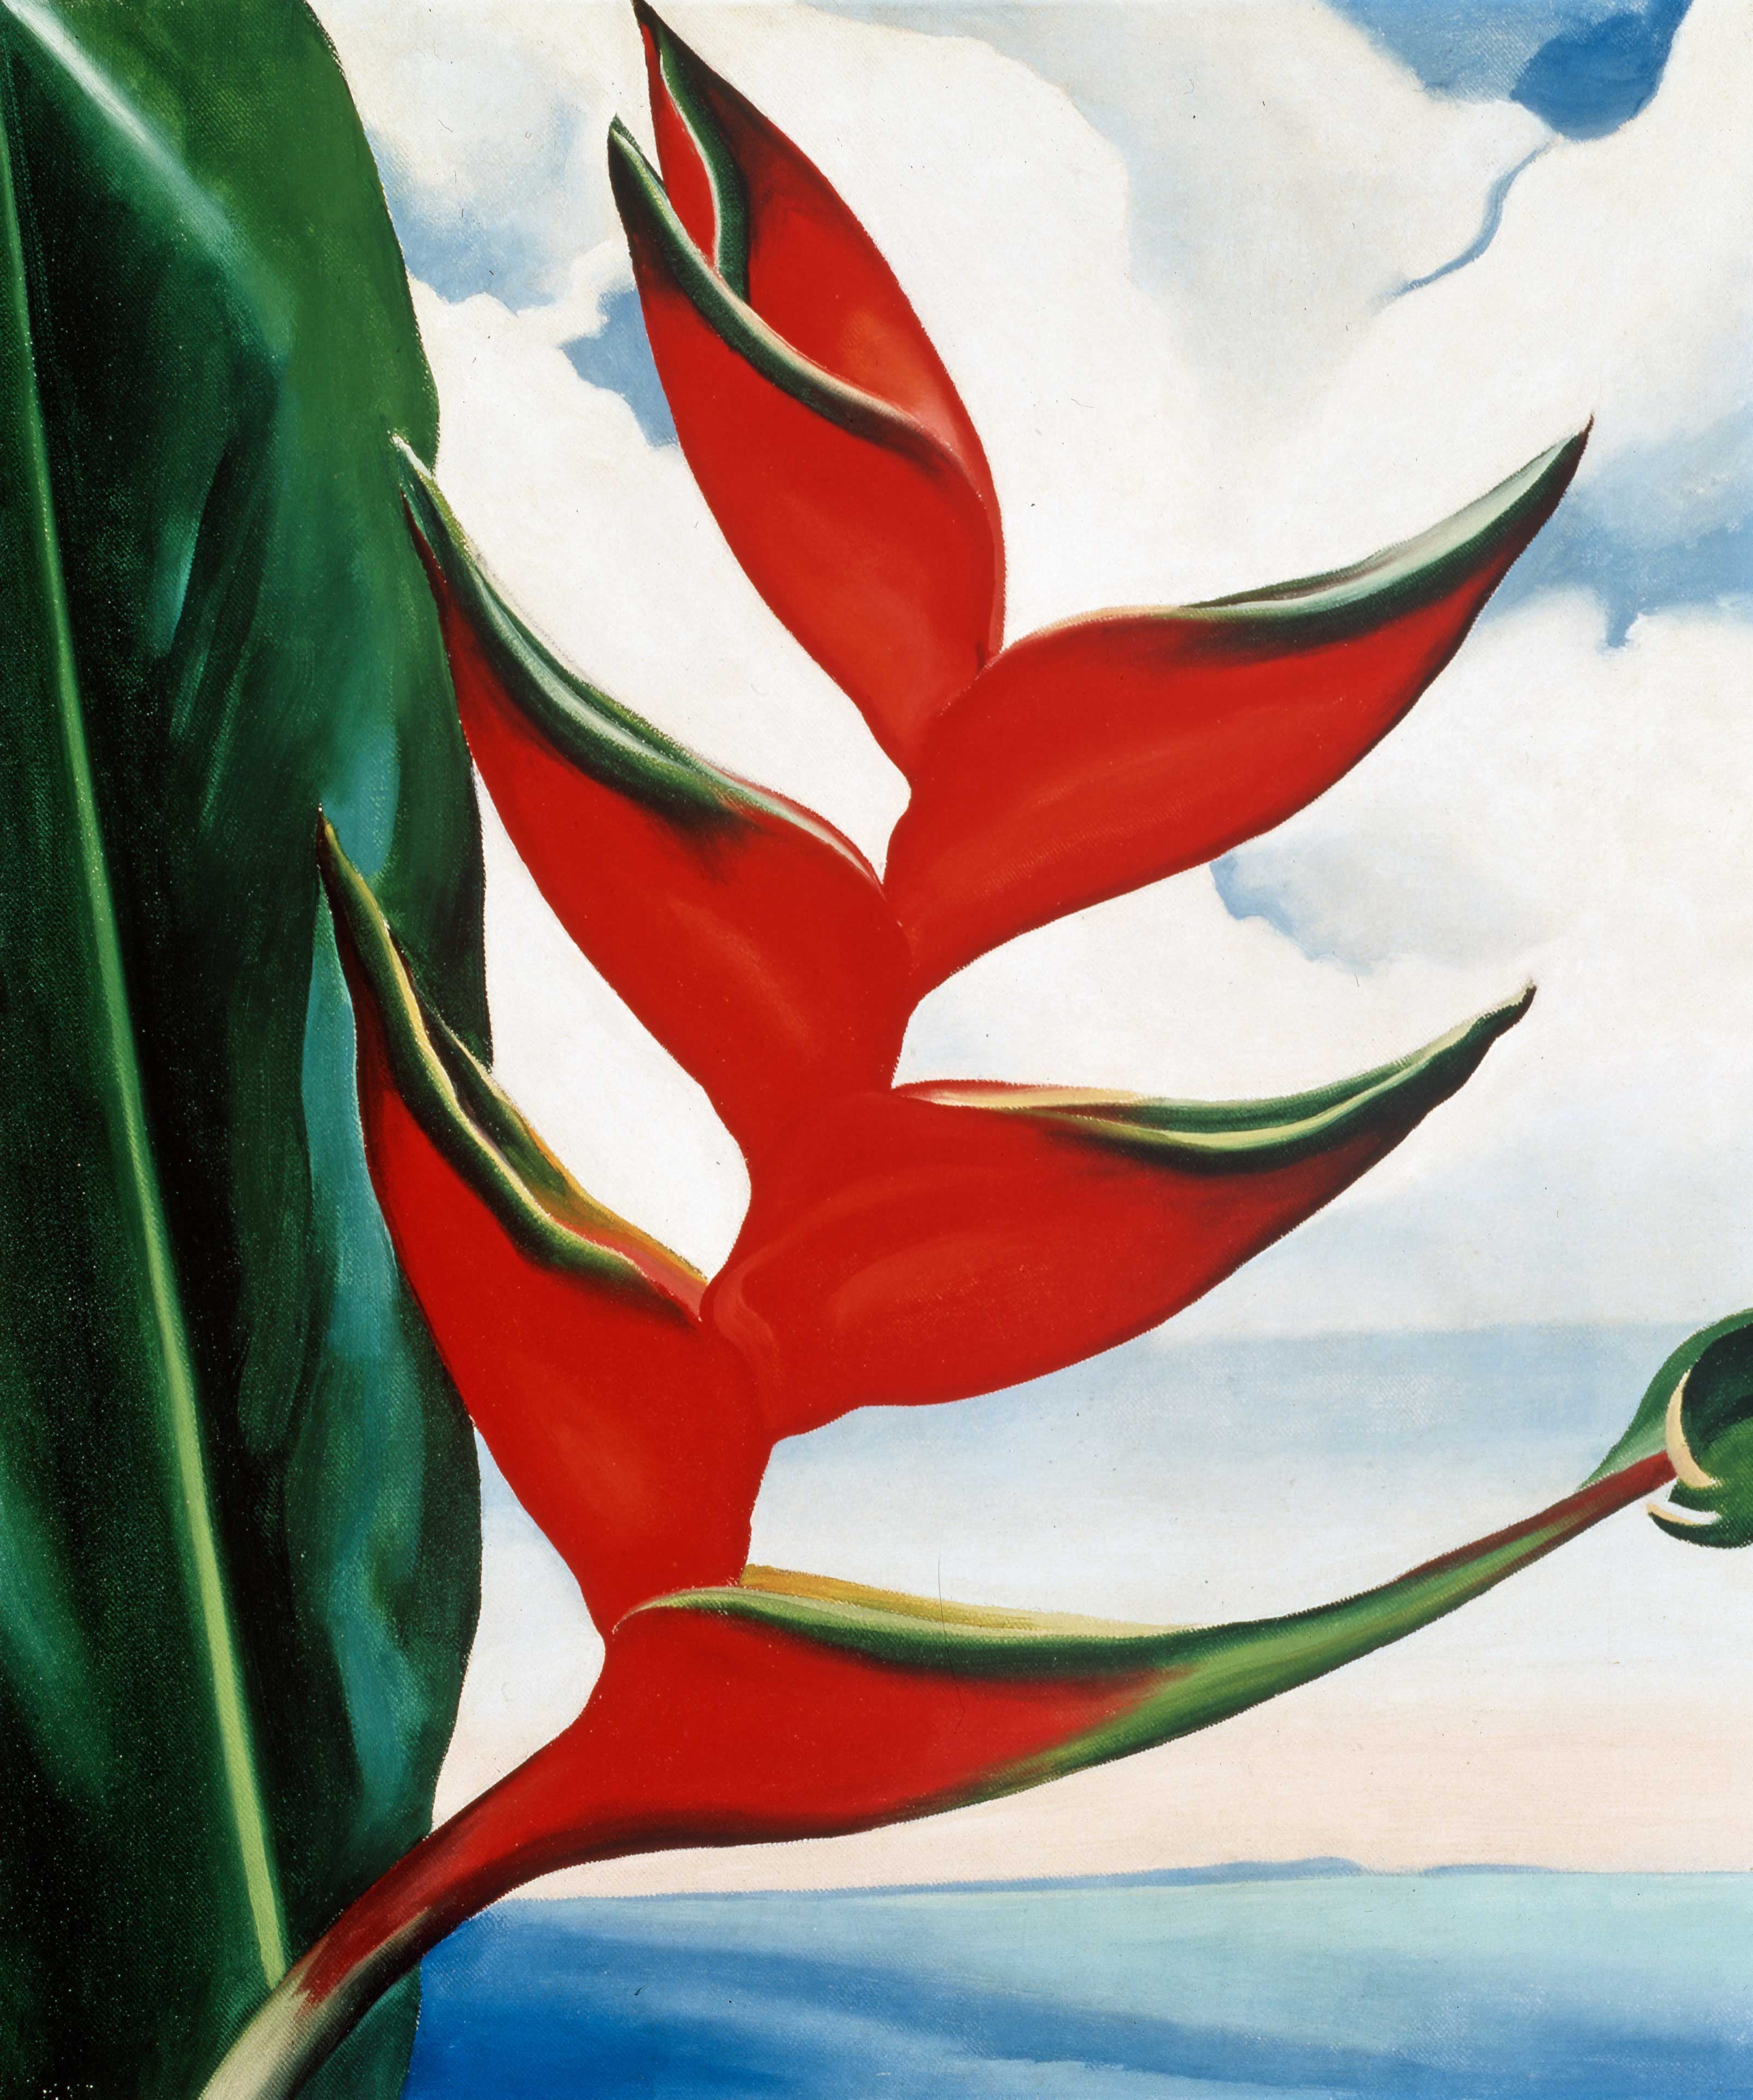 Georgia O’Keeffe. Heliconia, Crabs's Claw Ginger, 1939